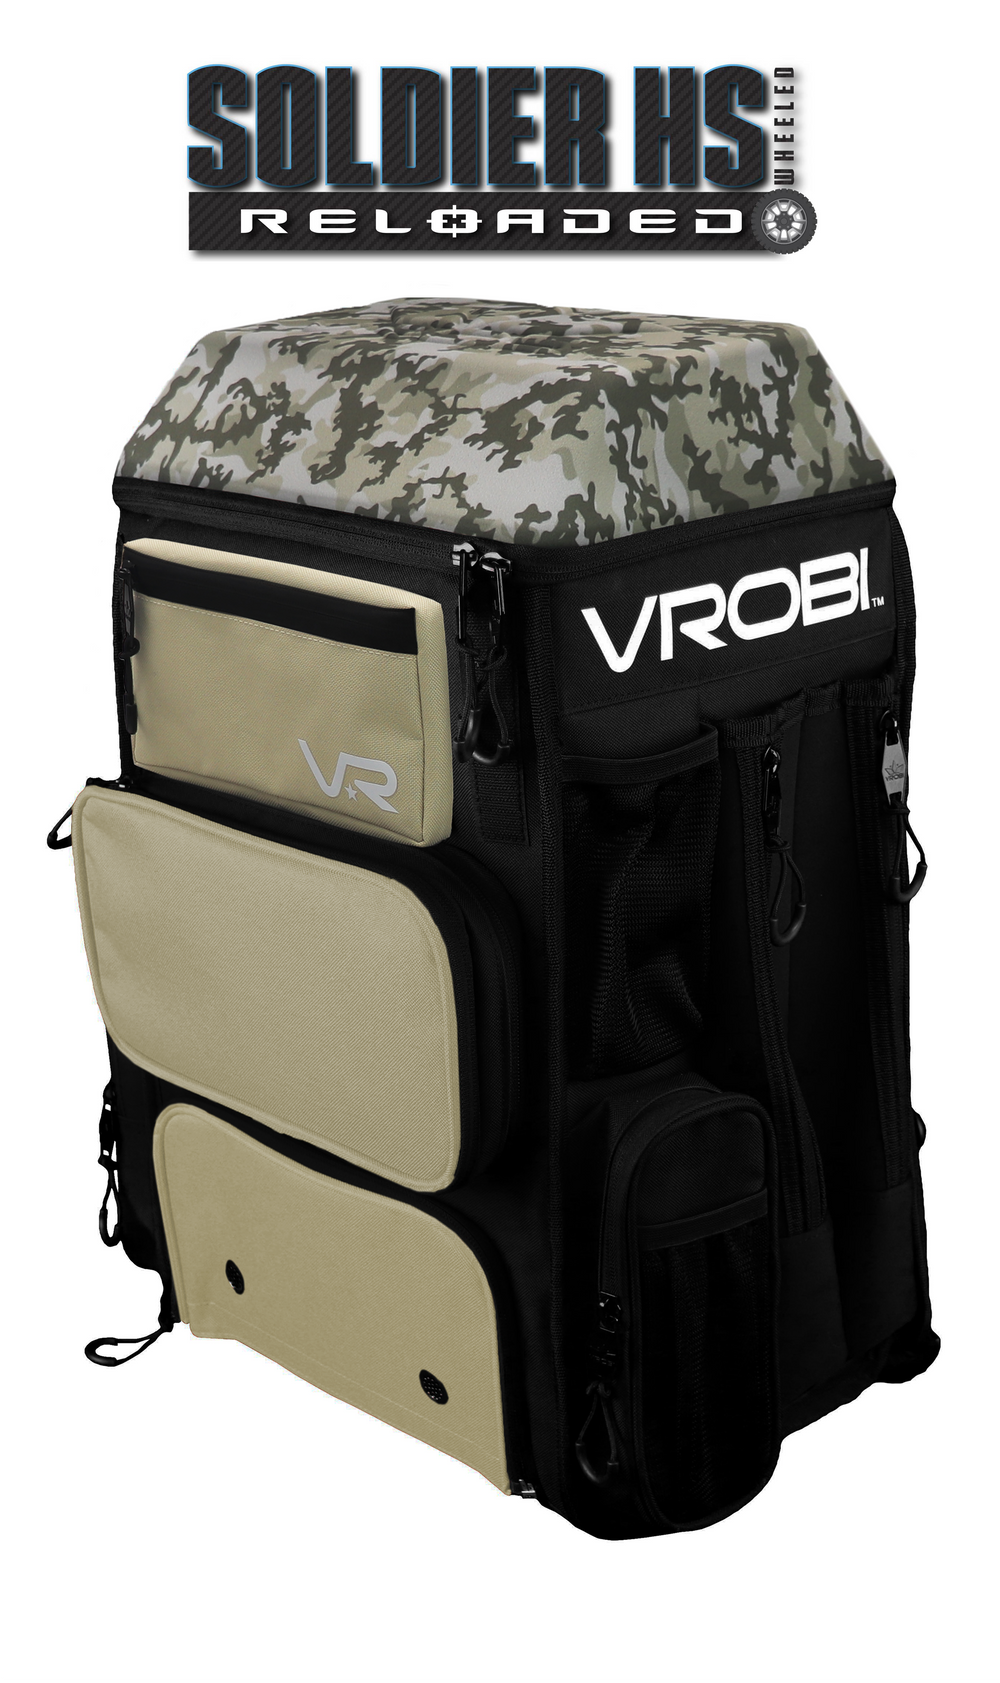 SOLDIER HS RELOADED ARMY WOODLAND CAMO WHEELED BAG